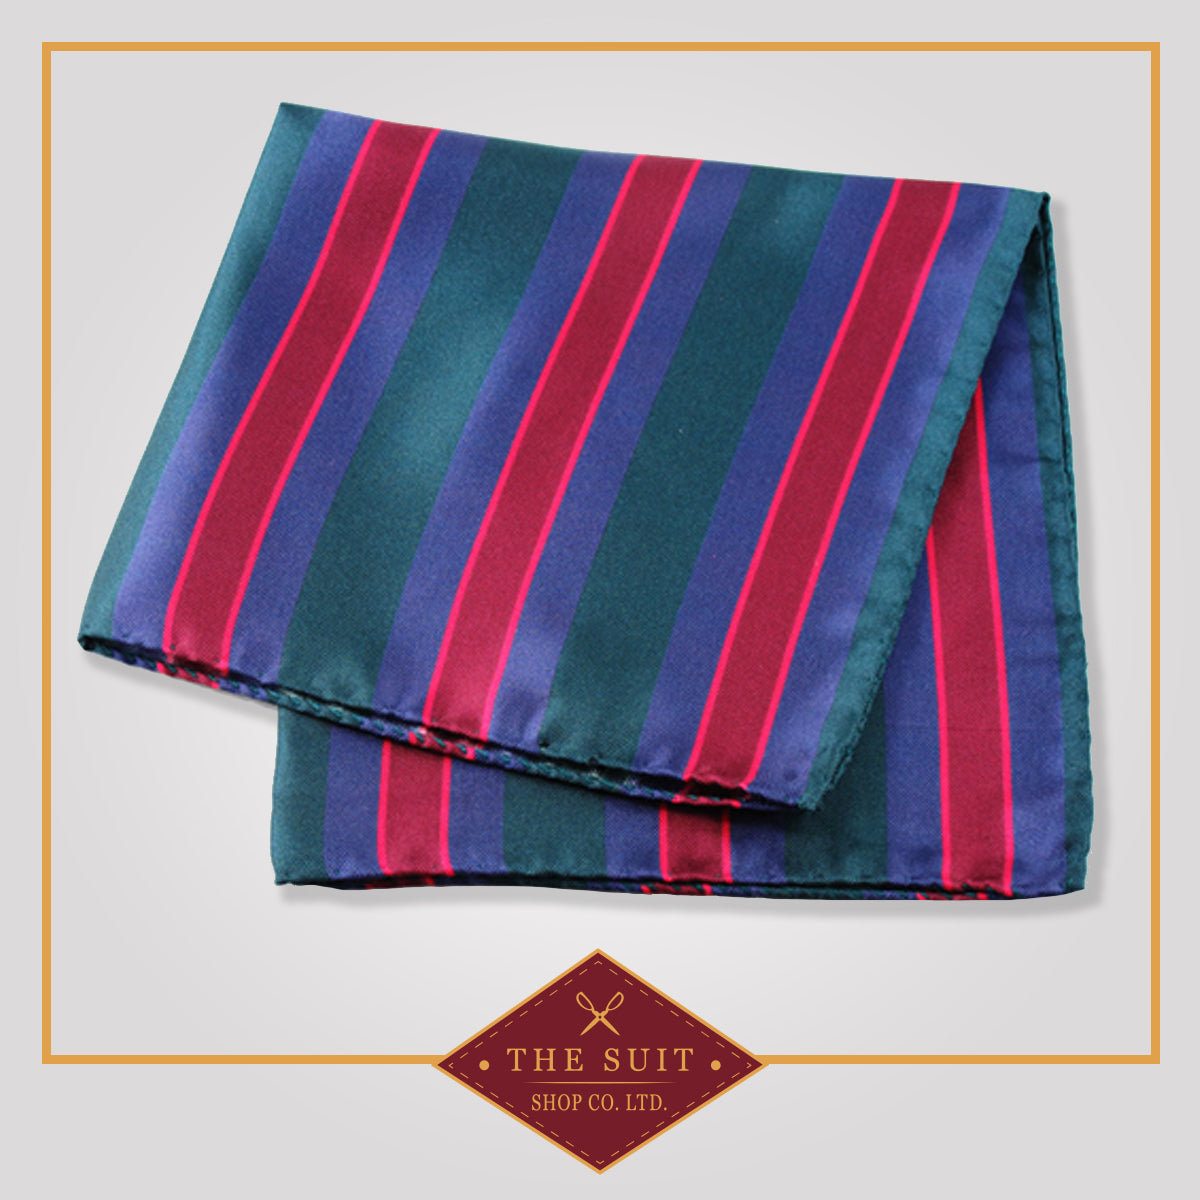 Victoria and Cardinal Striped Patterned Pocket Square